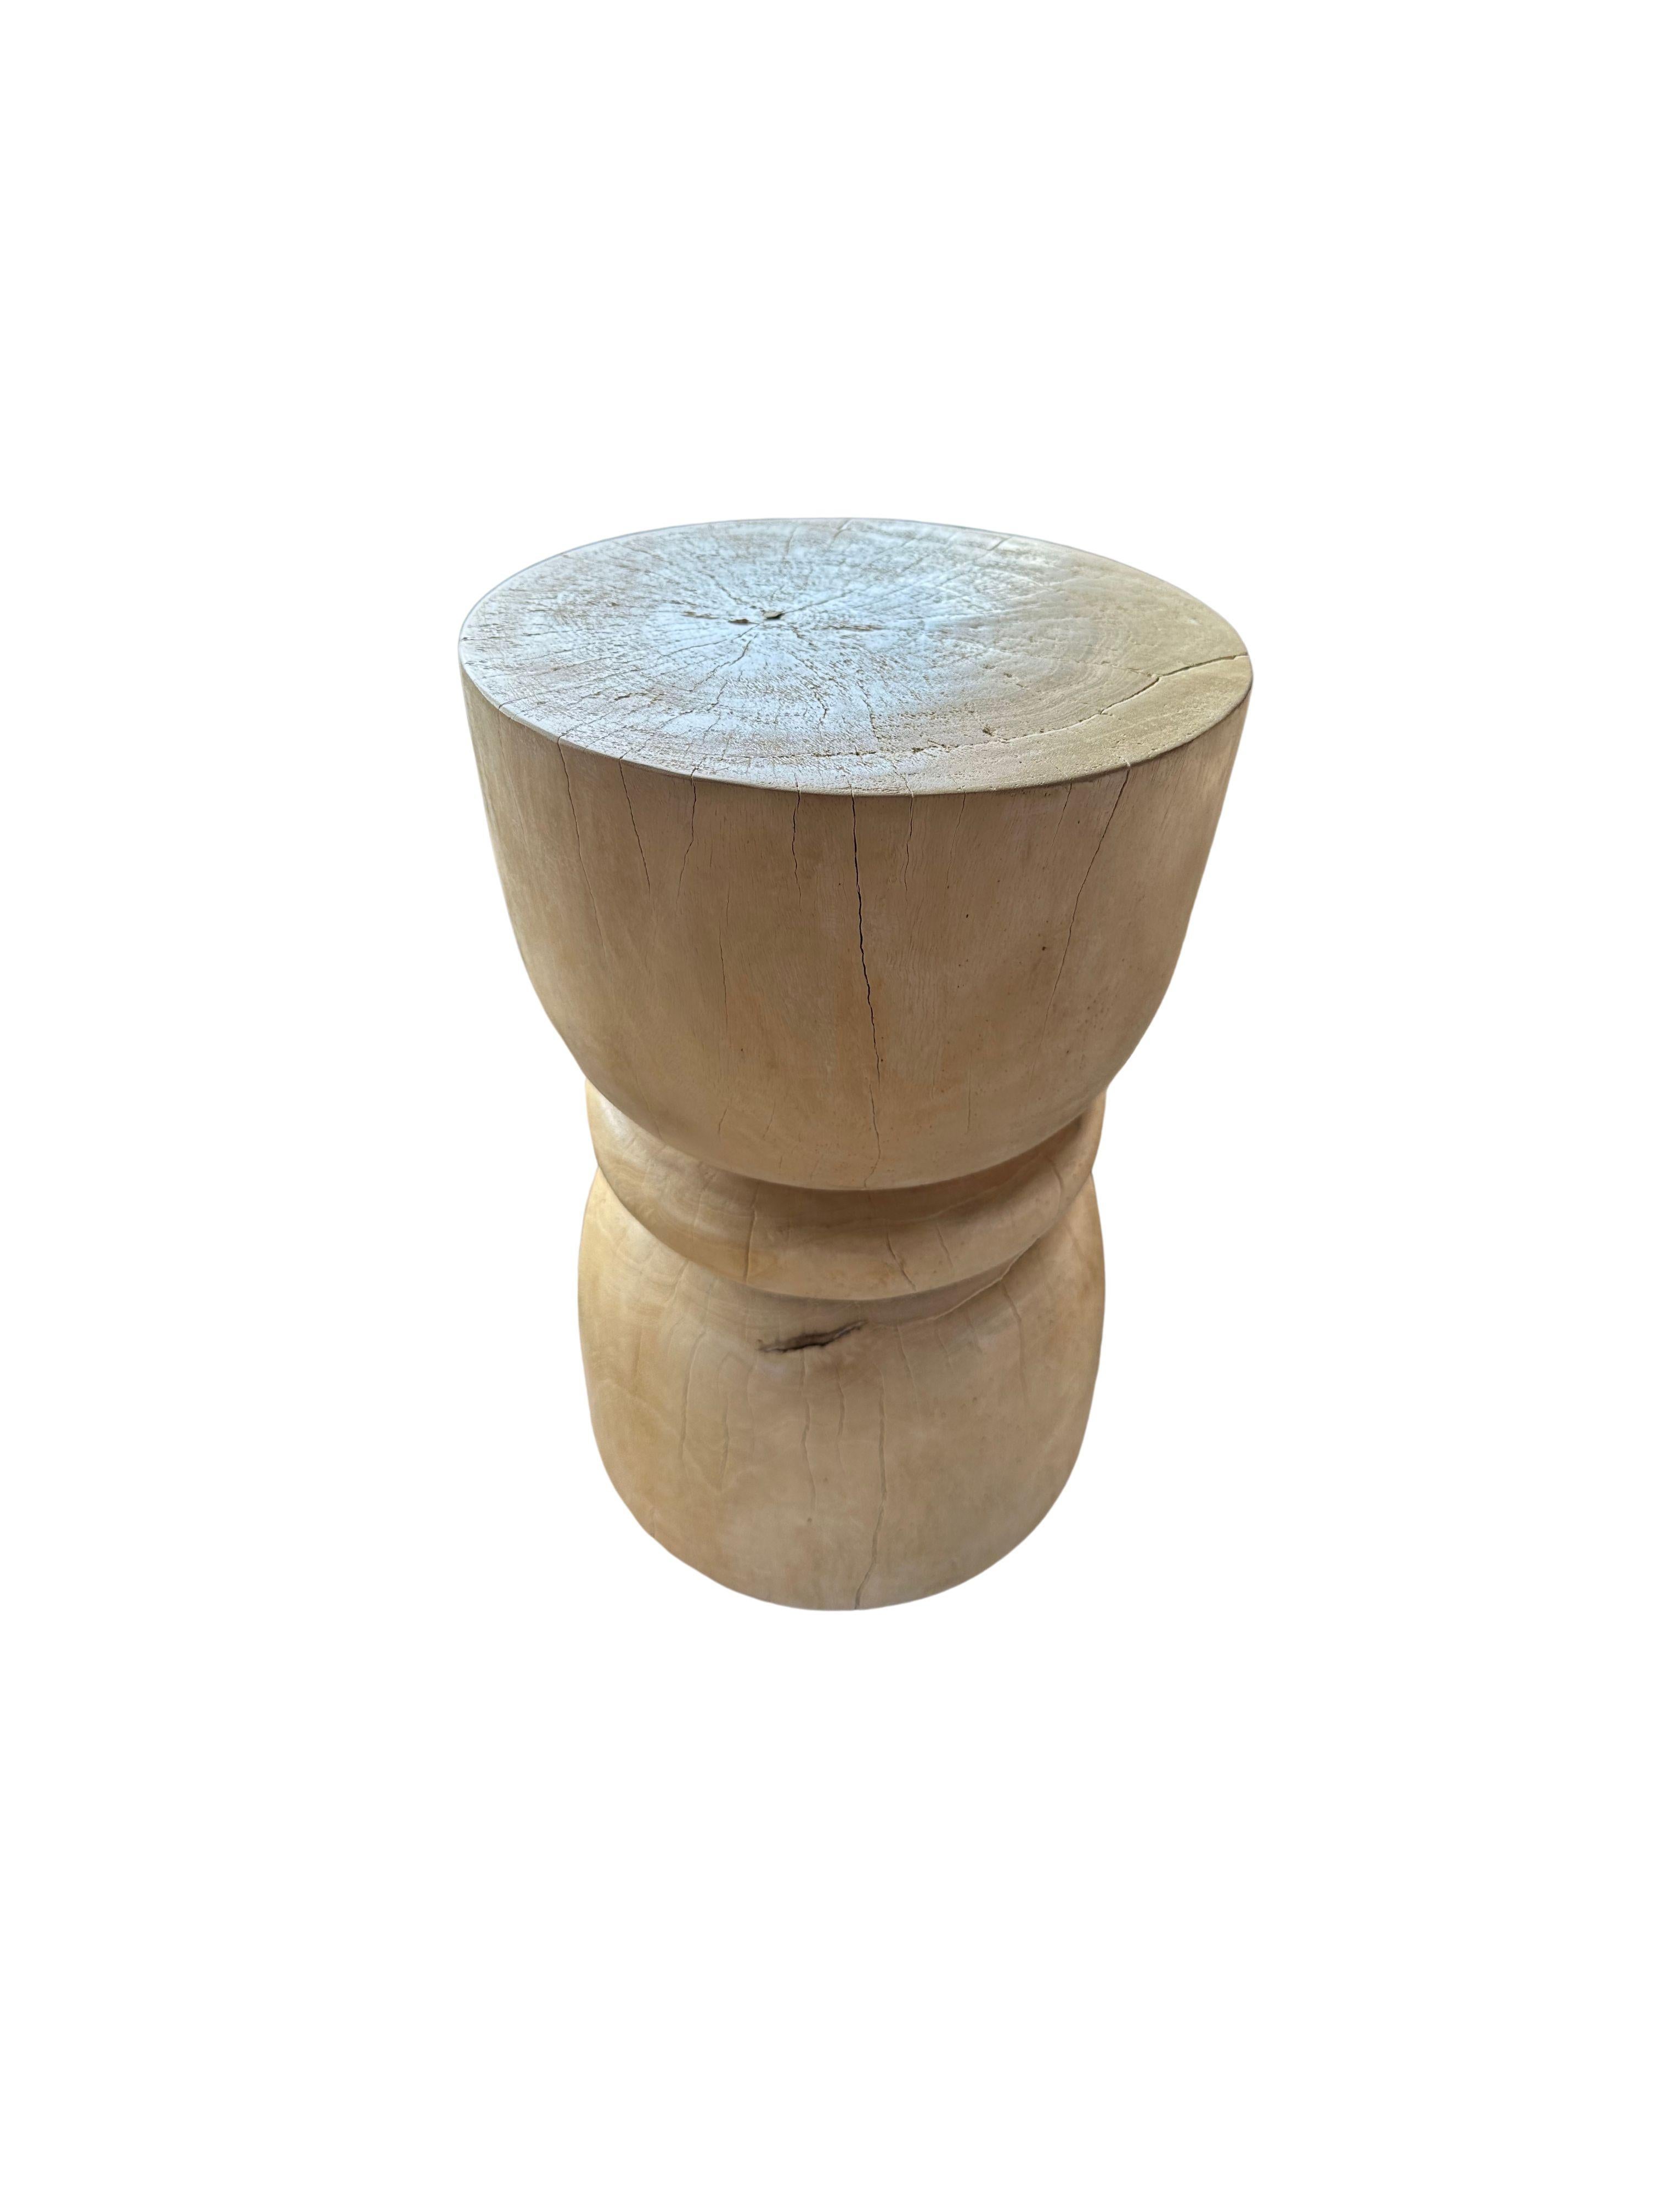 Indonesian Sculptural Side Table Mango Wood Bleached Finish For Sale